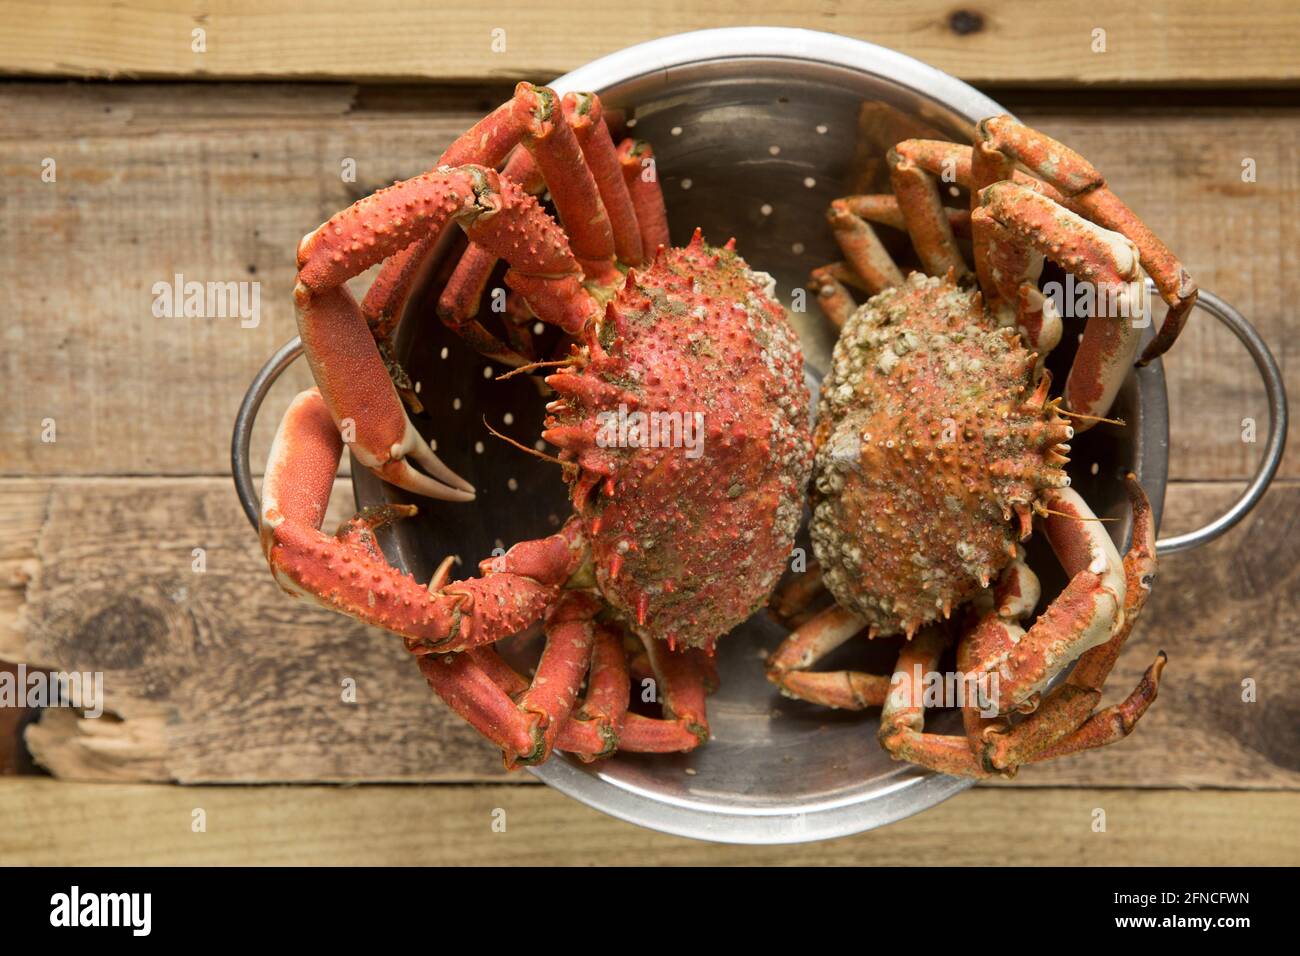 Two boiled, cooked spider crabs, Maja brachydactyla, that have been left to cool after cooking, Spider crabs are common in parts of the UK and are bei Stock Photo